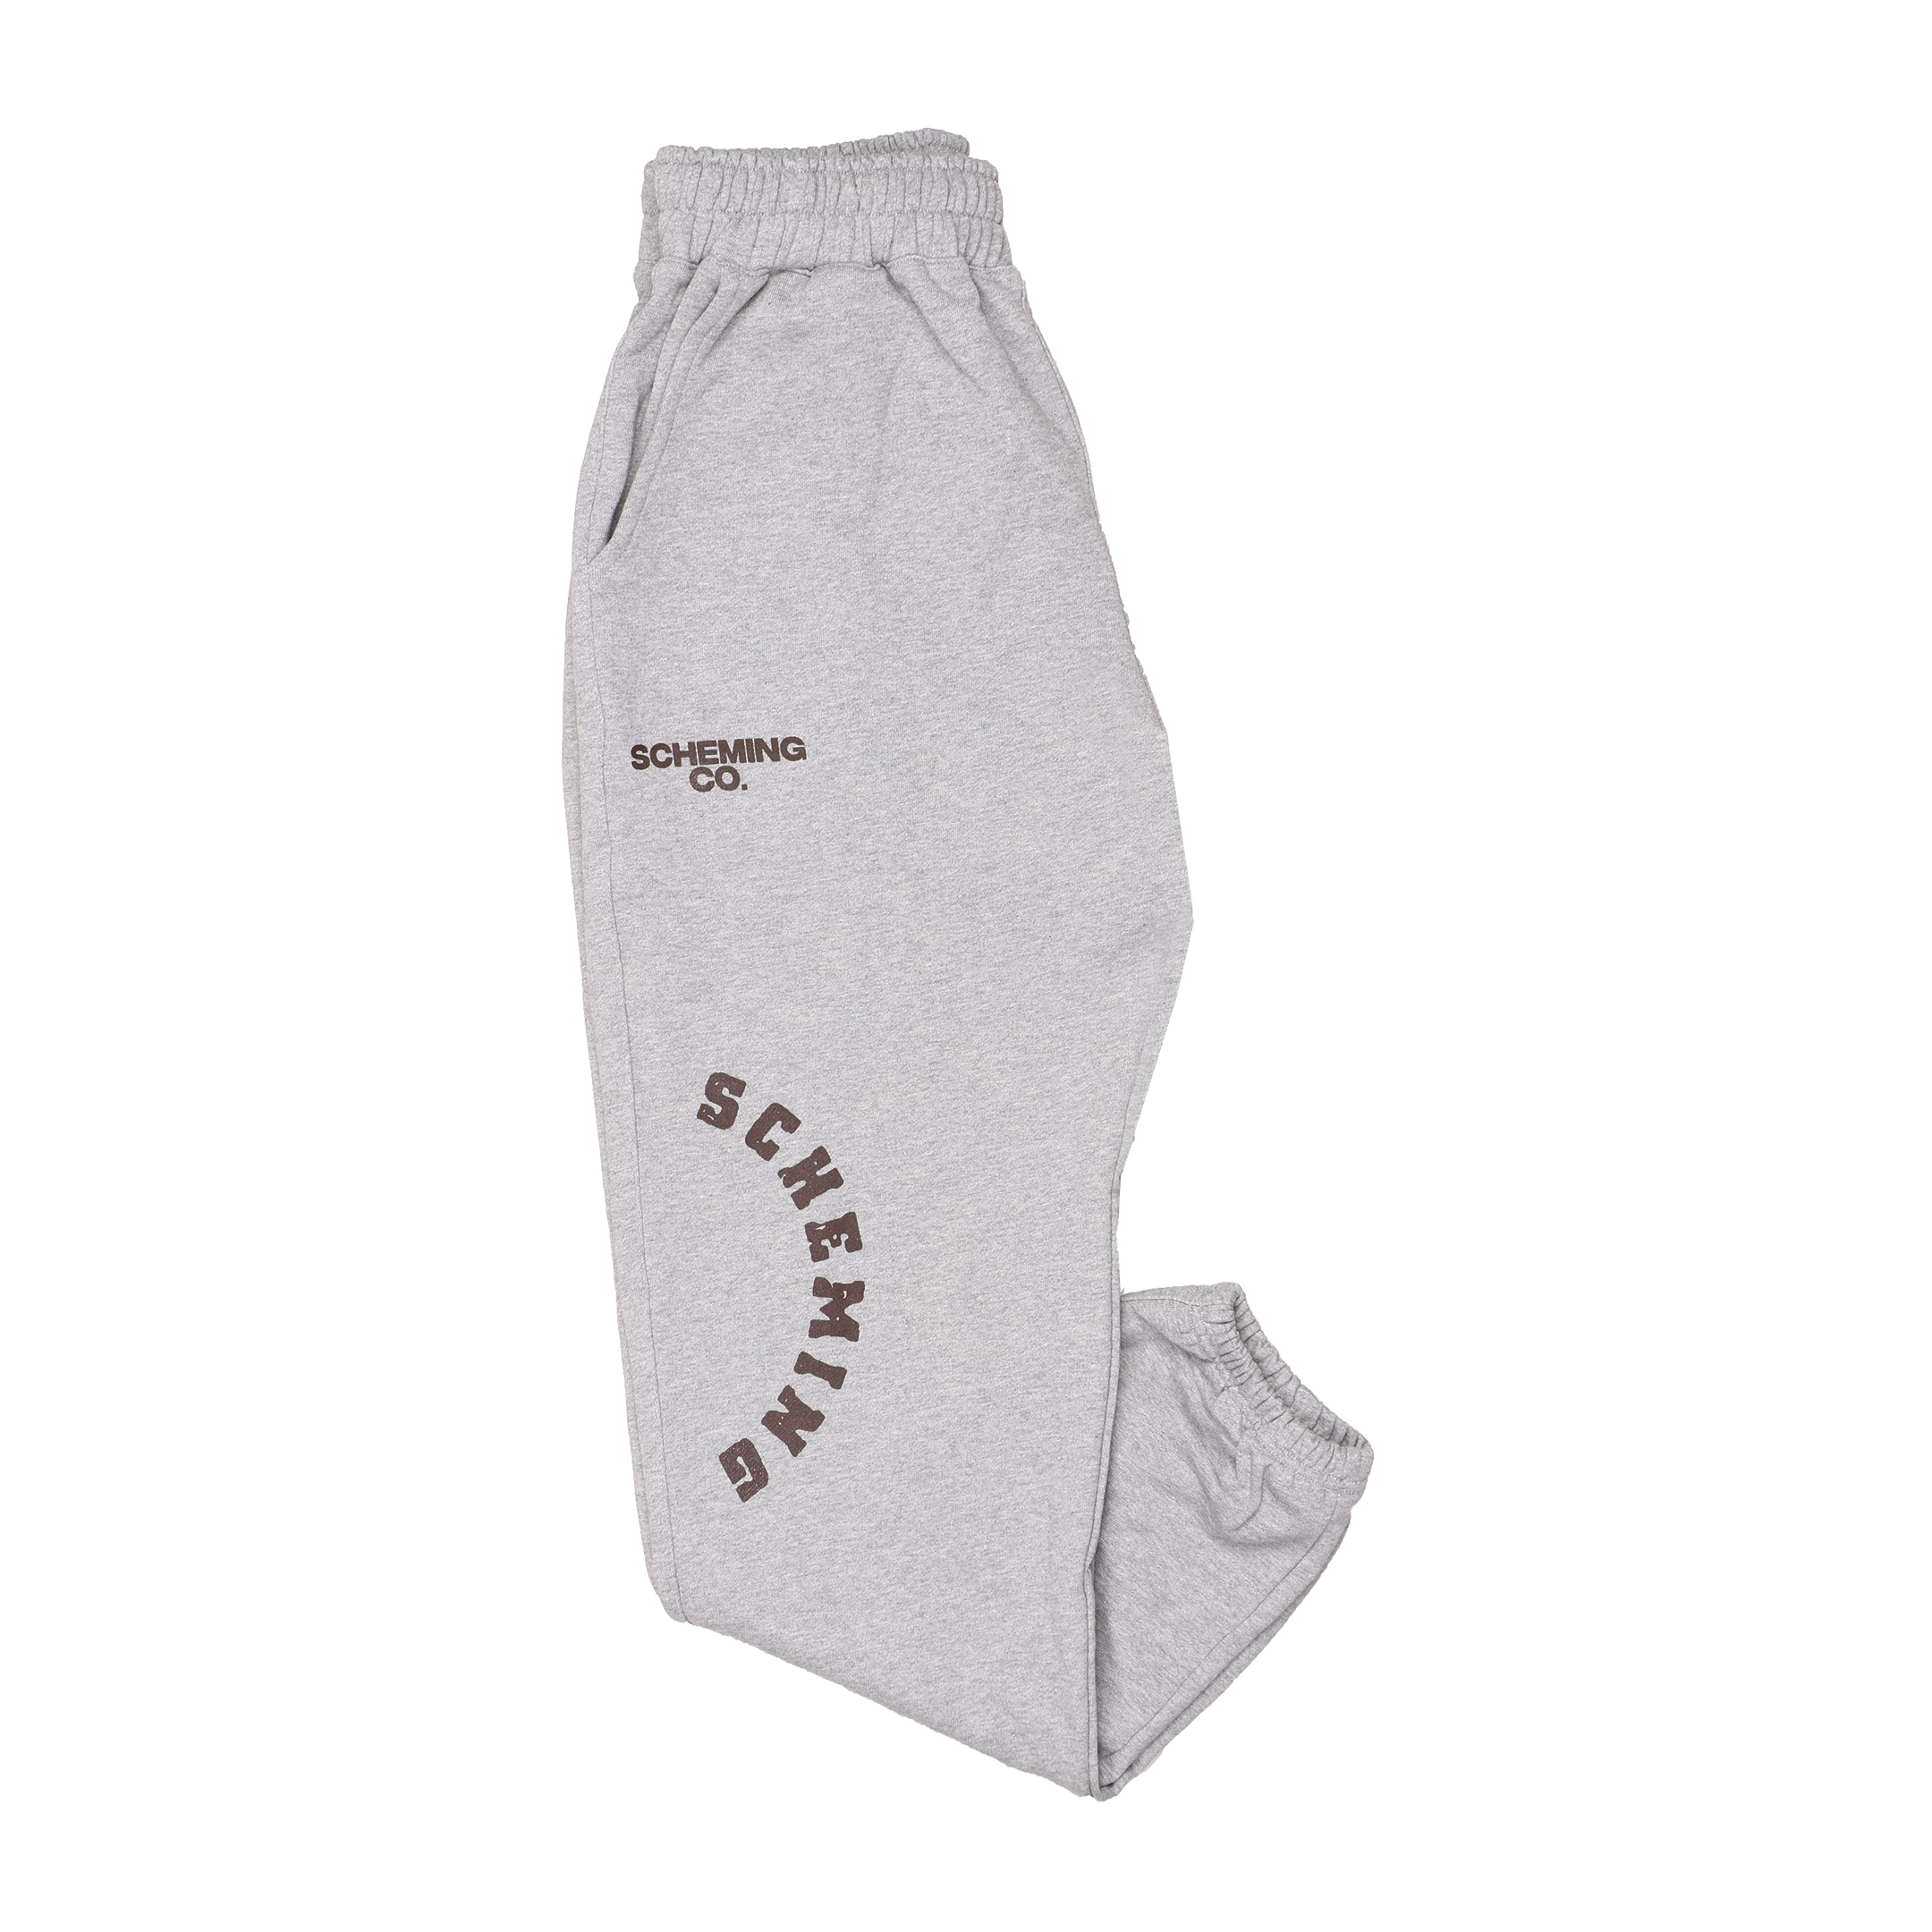 Up To No Good Sweatpants - Scheming Co.